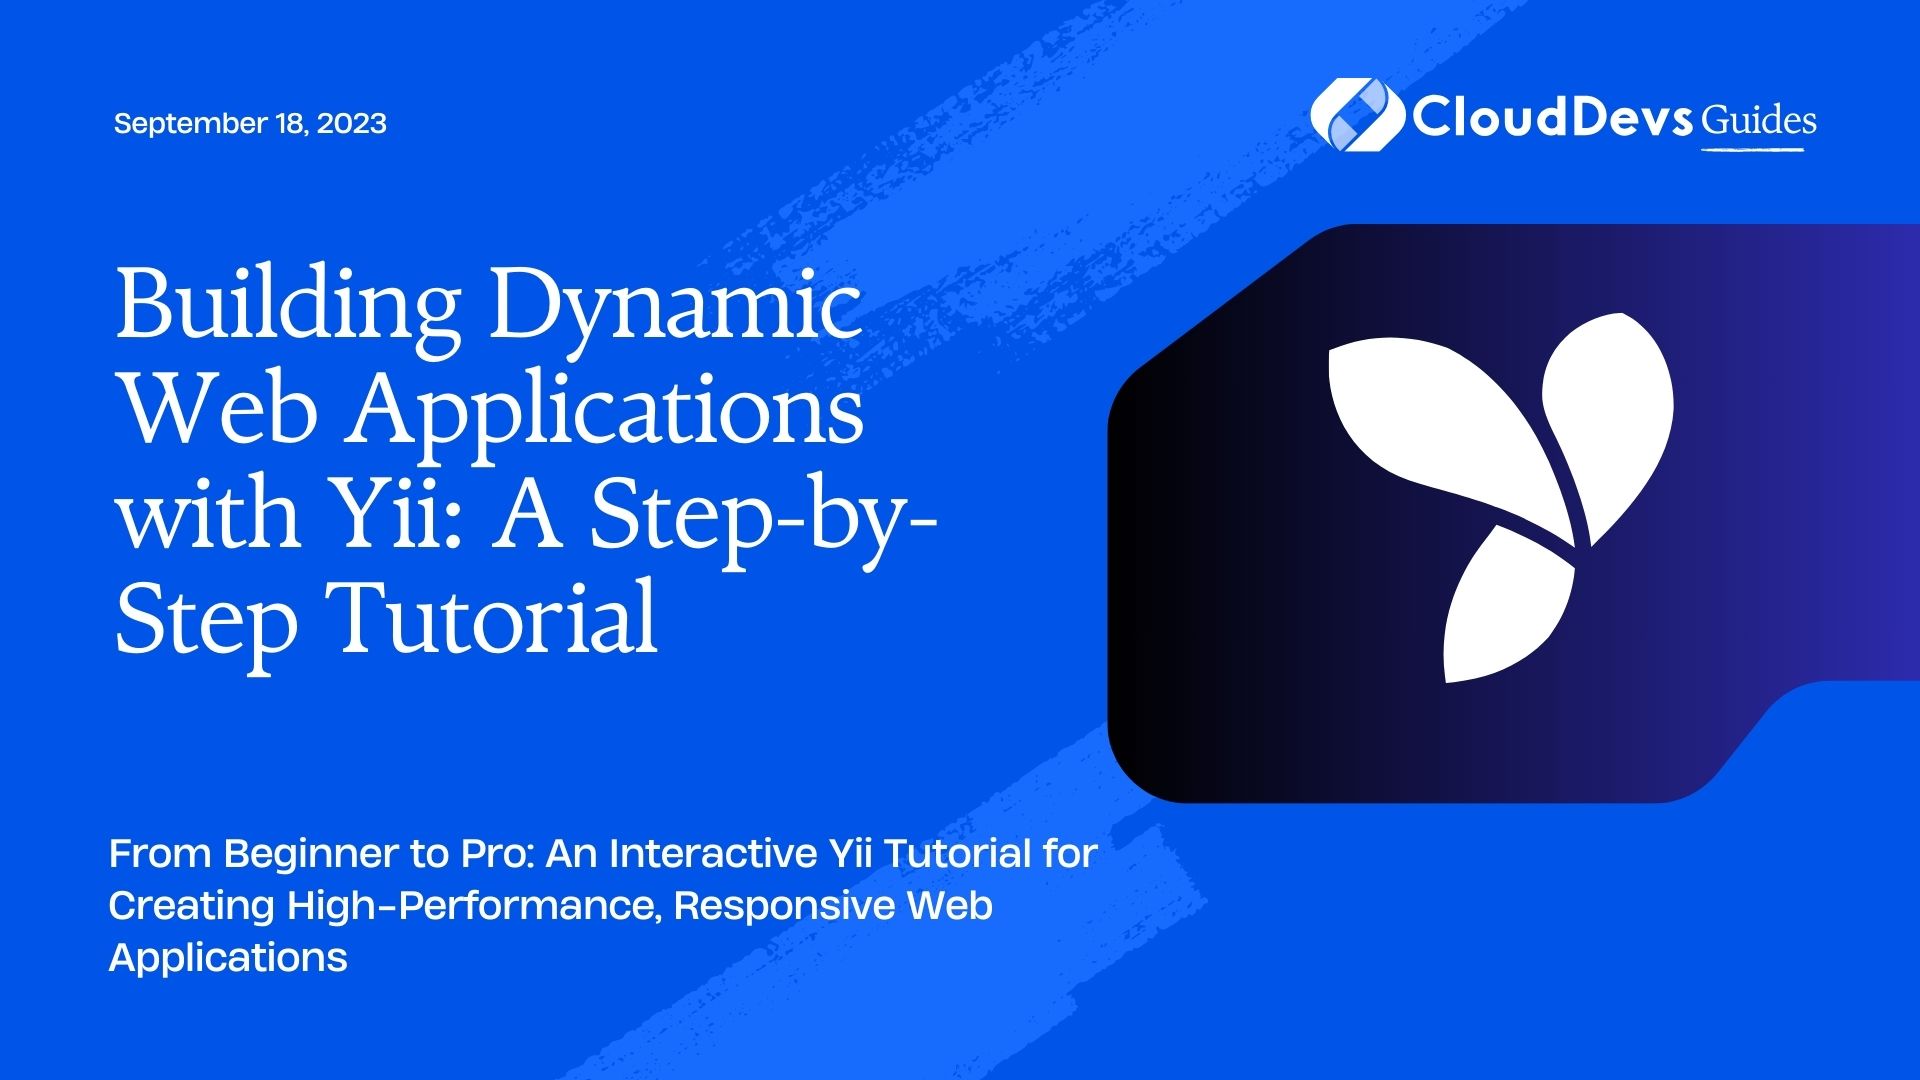 Building Dynamic Web Applications with Yii: A Step-by-Step Tutorial